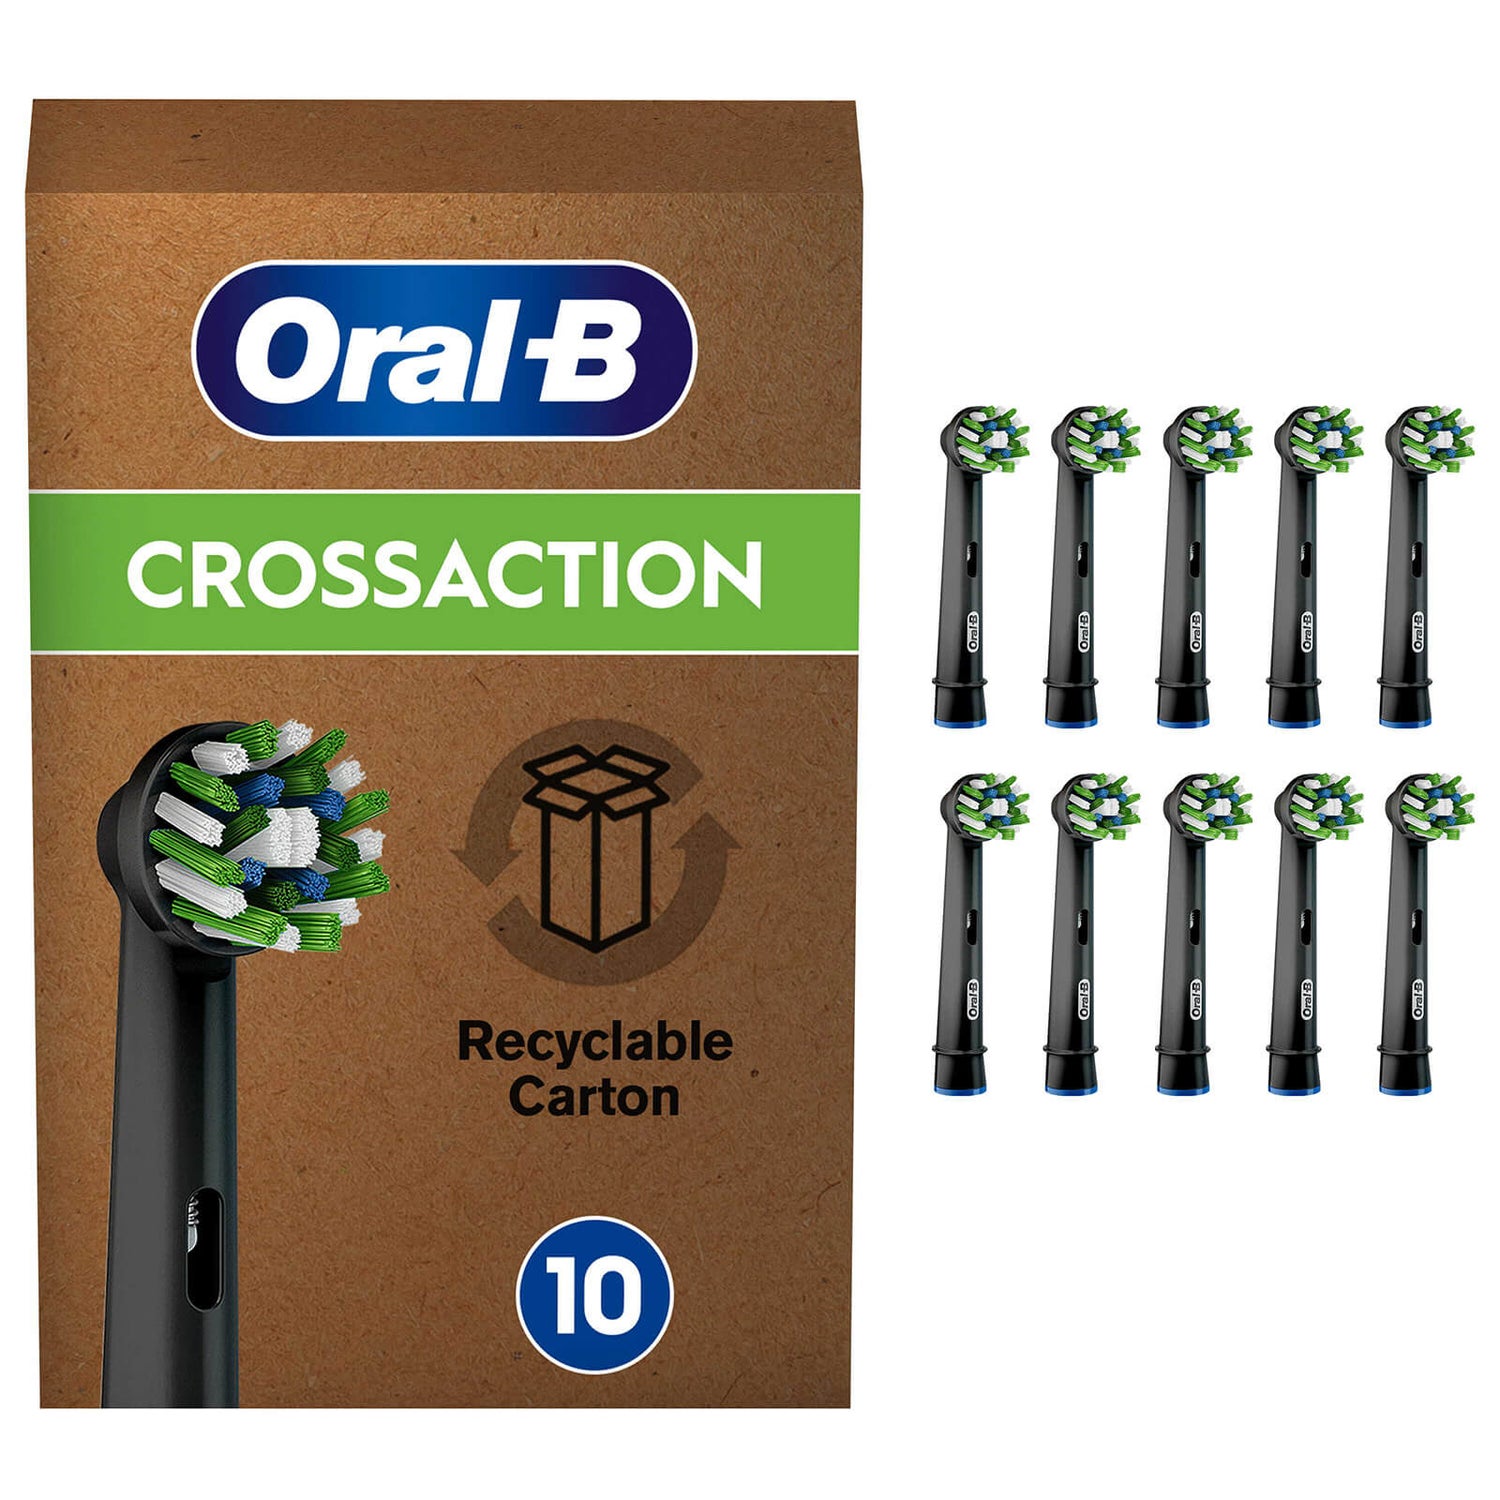 Oral-B CrossAction Toothbrush Head Black, CleanMaximiser Technology, 10 Counts, Mailbox Sized Pack